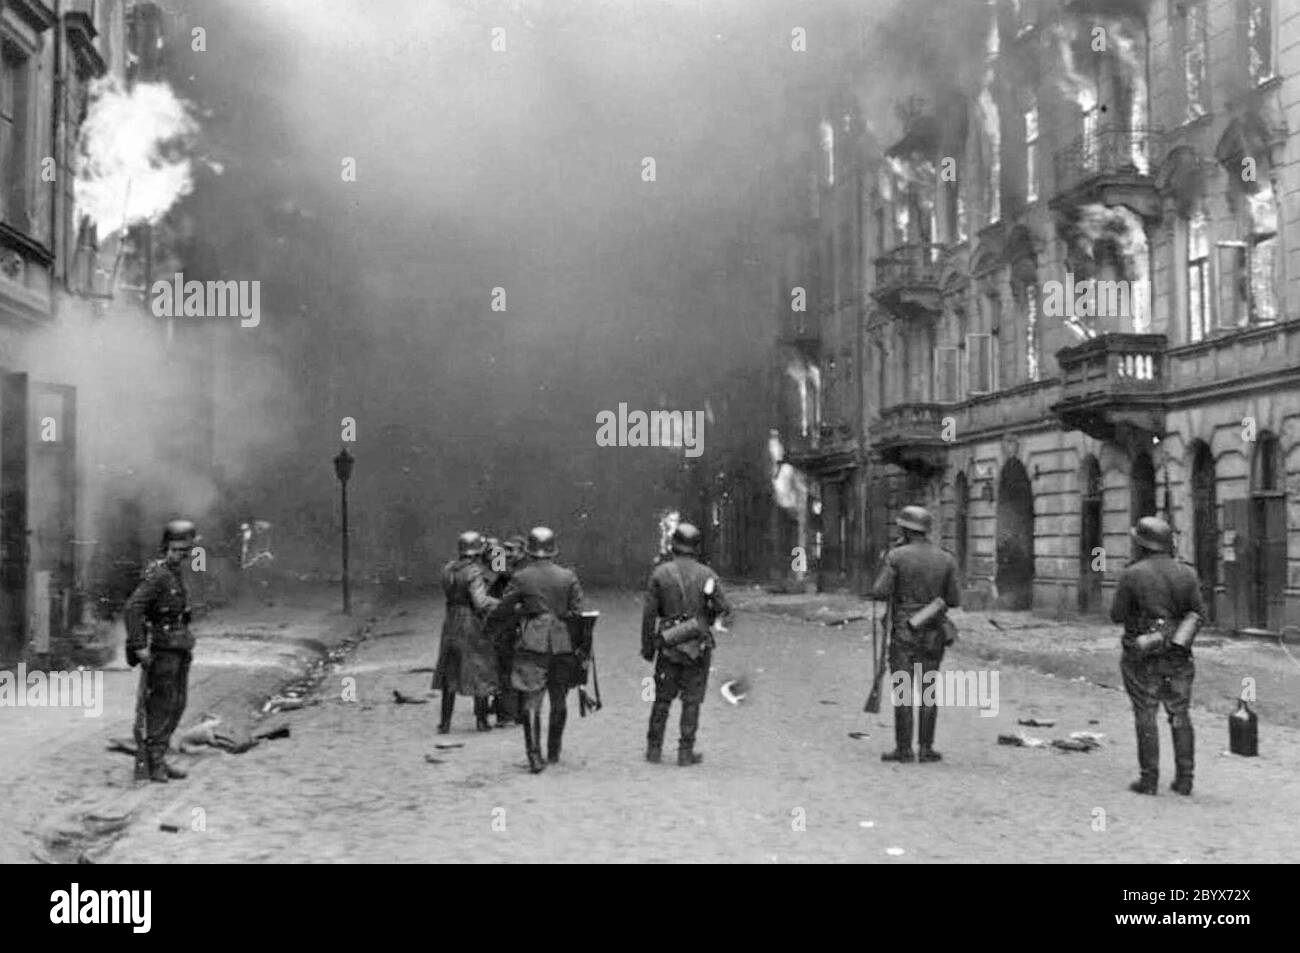 Stroop Report - Warsaw Ghetto Uprising - Nazi soldiers burning buidings in Warsaw Ghetto ca. 1943 Stock Photo